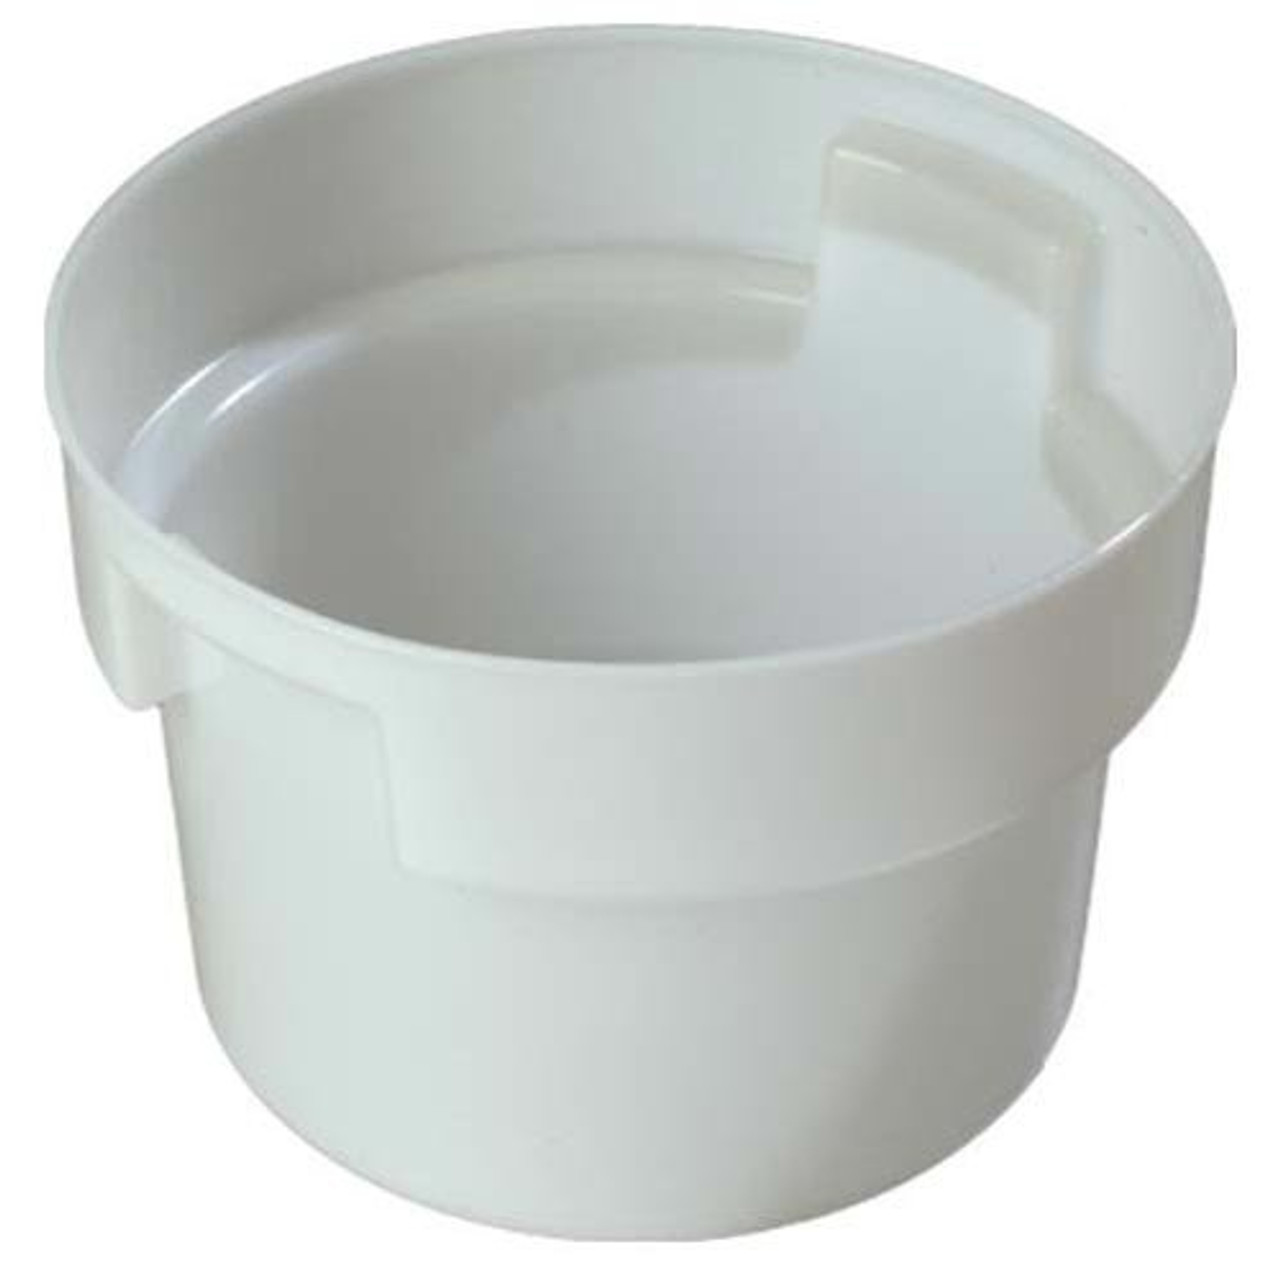 Storage Bowl with Lid